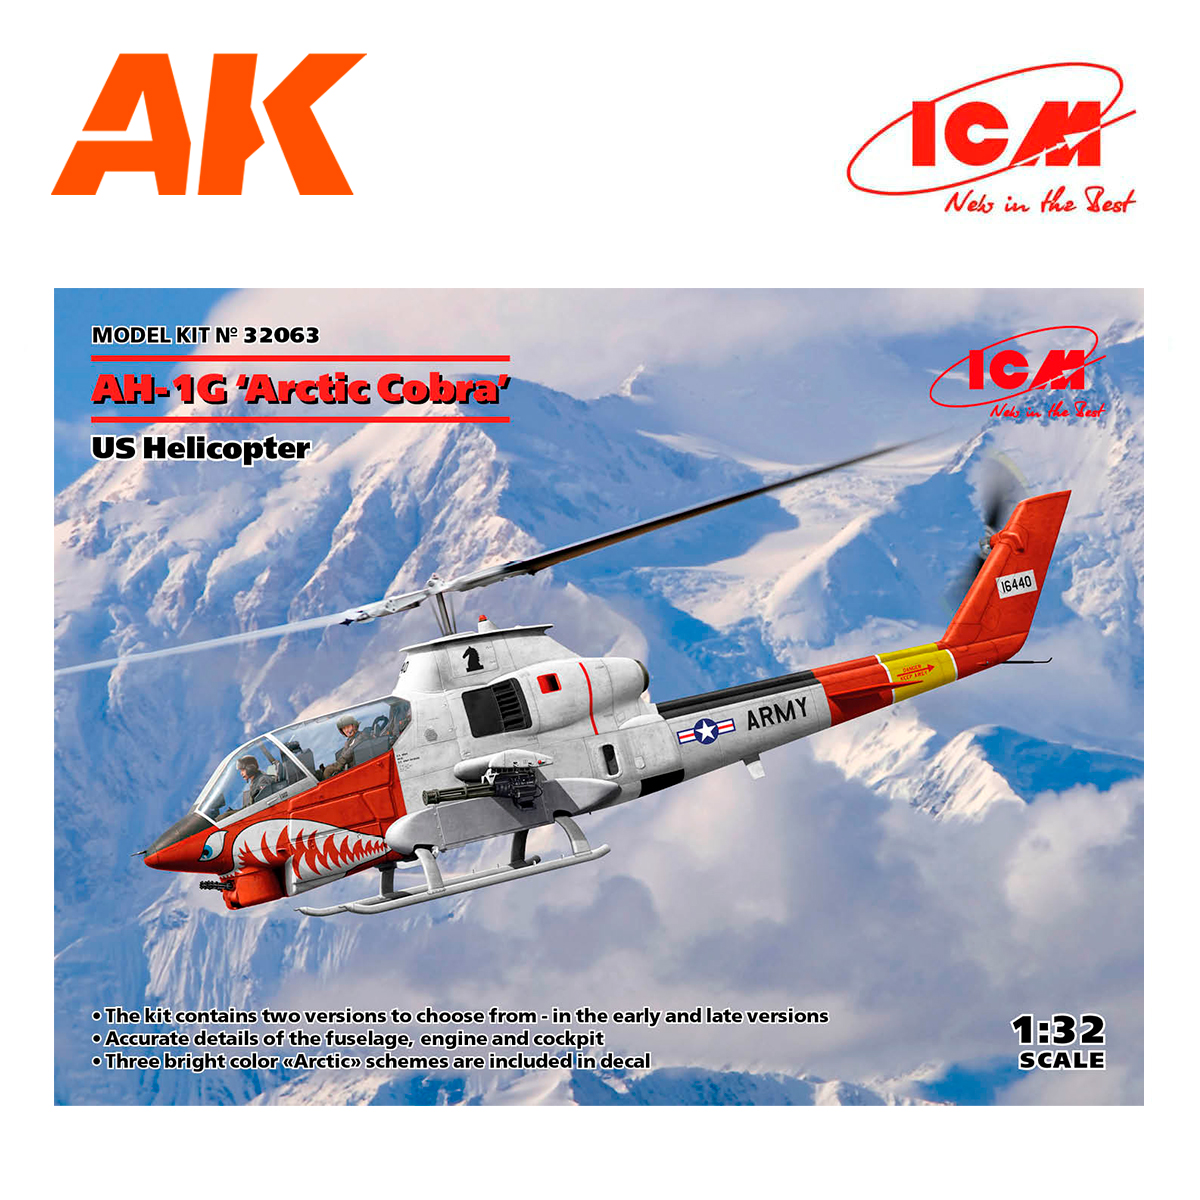 AH-1G ‘Arctic Cobra’, US Helicopter 1/32